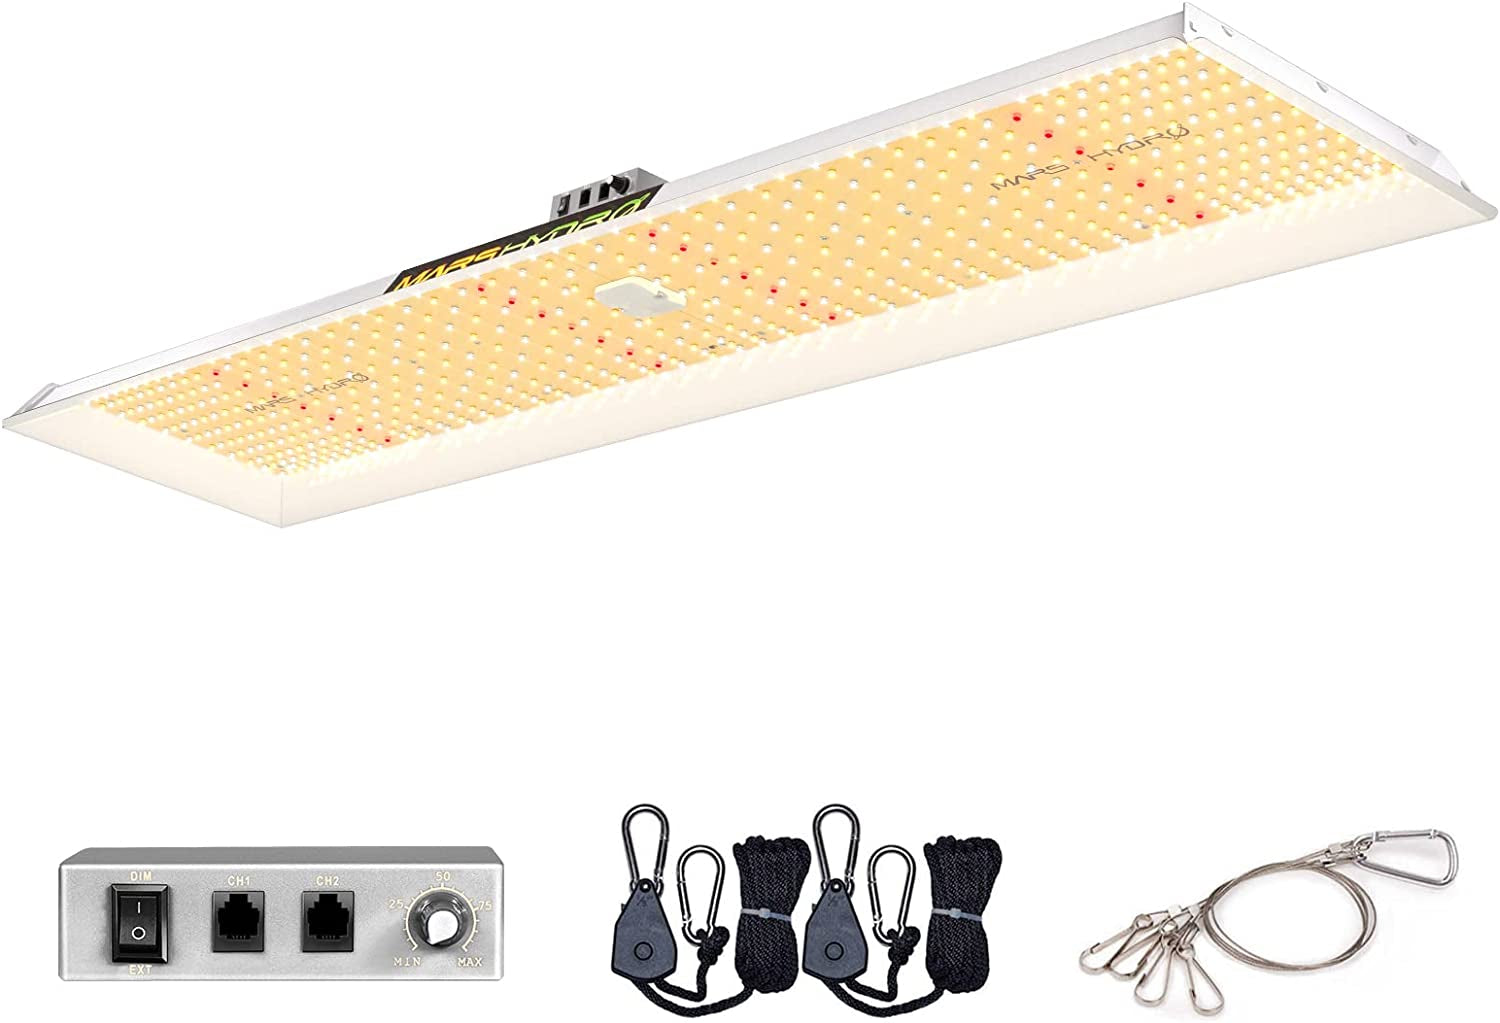 MARS HYDRO, MARS HYDRO TSW2000 Led Grow Light 300 Watt 4X4Ft Coverage Full Spectrum Growing Lamps for Indoor Plants Dimmable Daisy Chain Seeding Veg Bloom Light for Hydroponics Greenhouse Indoor LED Grow